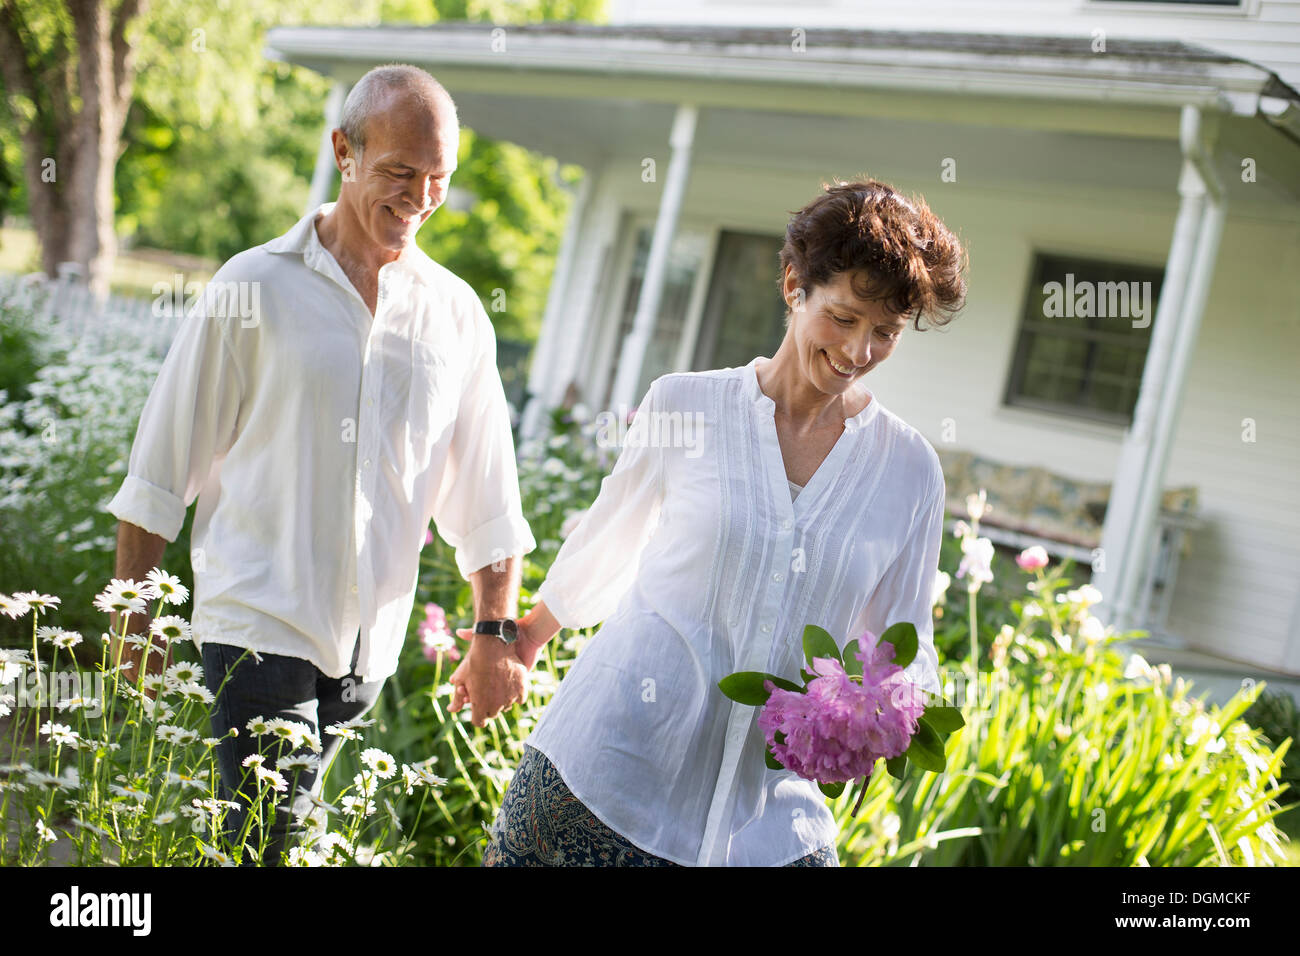 Organic farm. Summer party. A mature couple in white shirts walking holding hands through the garden. Stock Photo